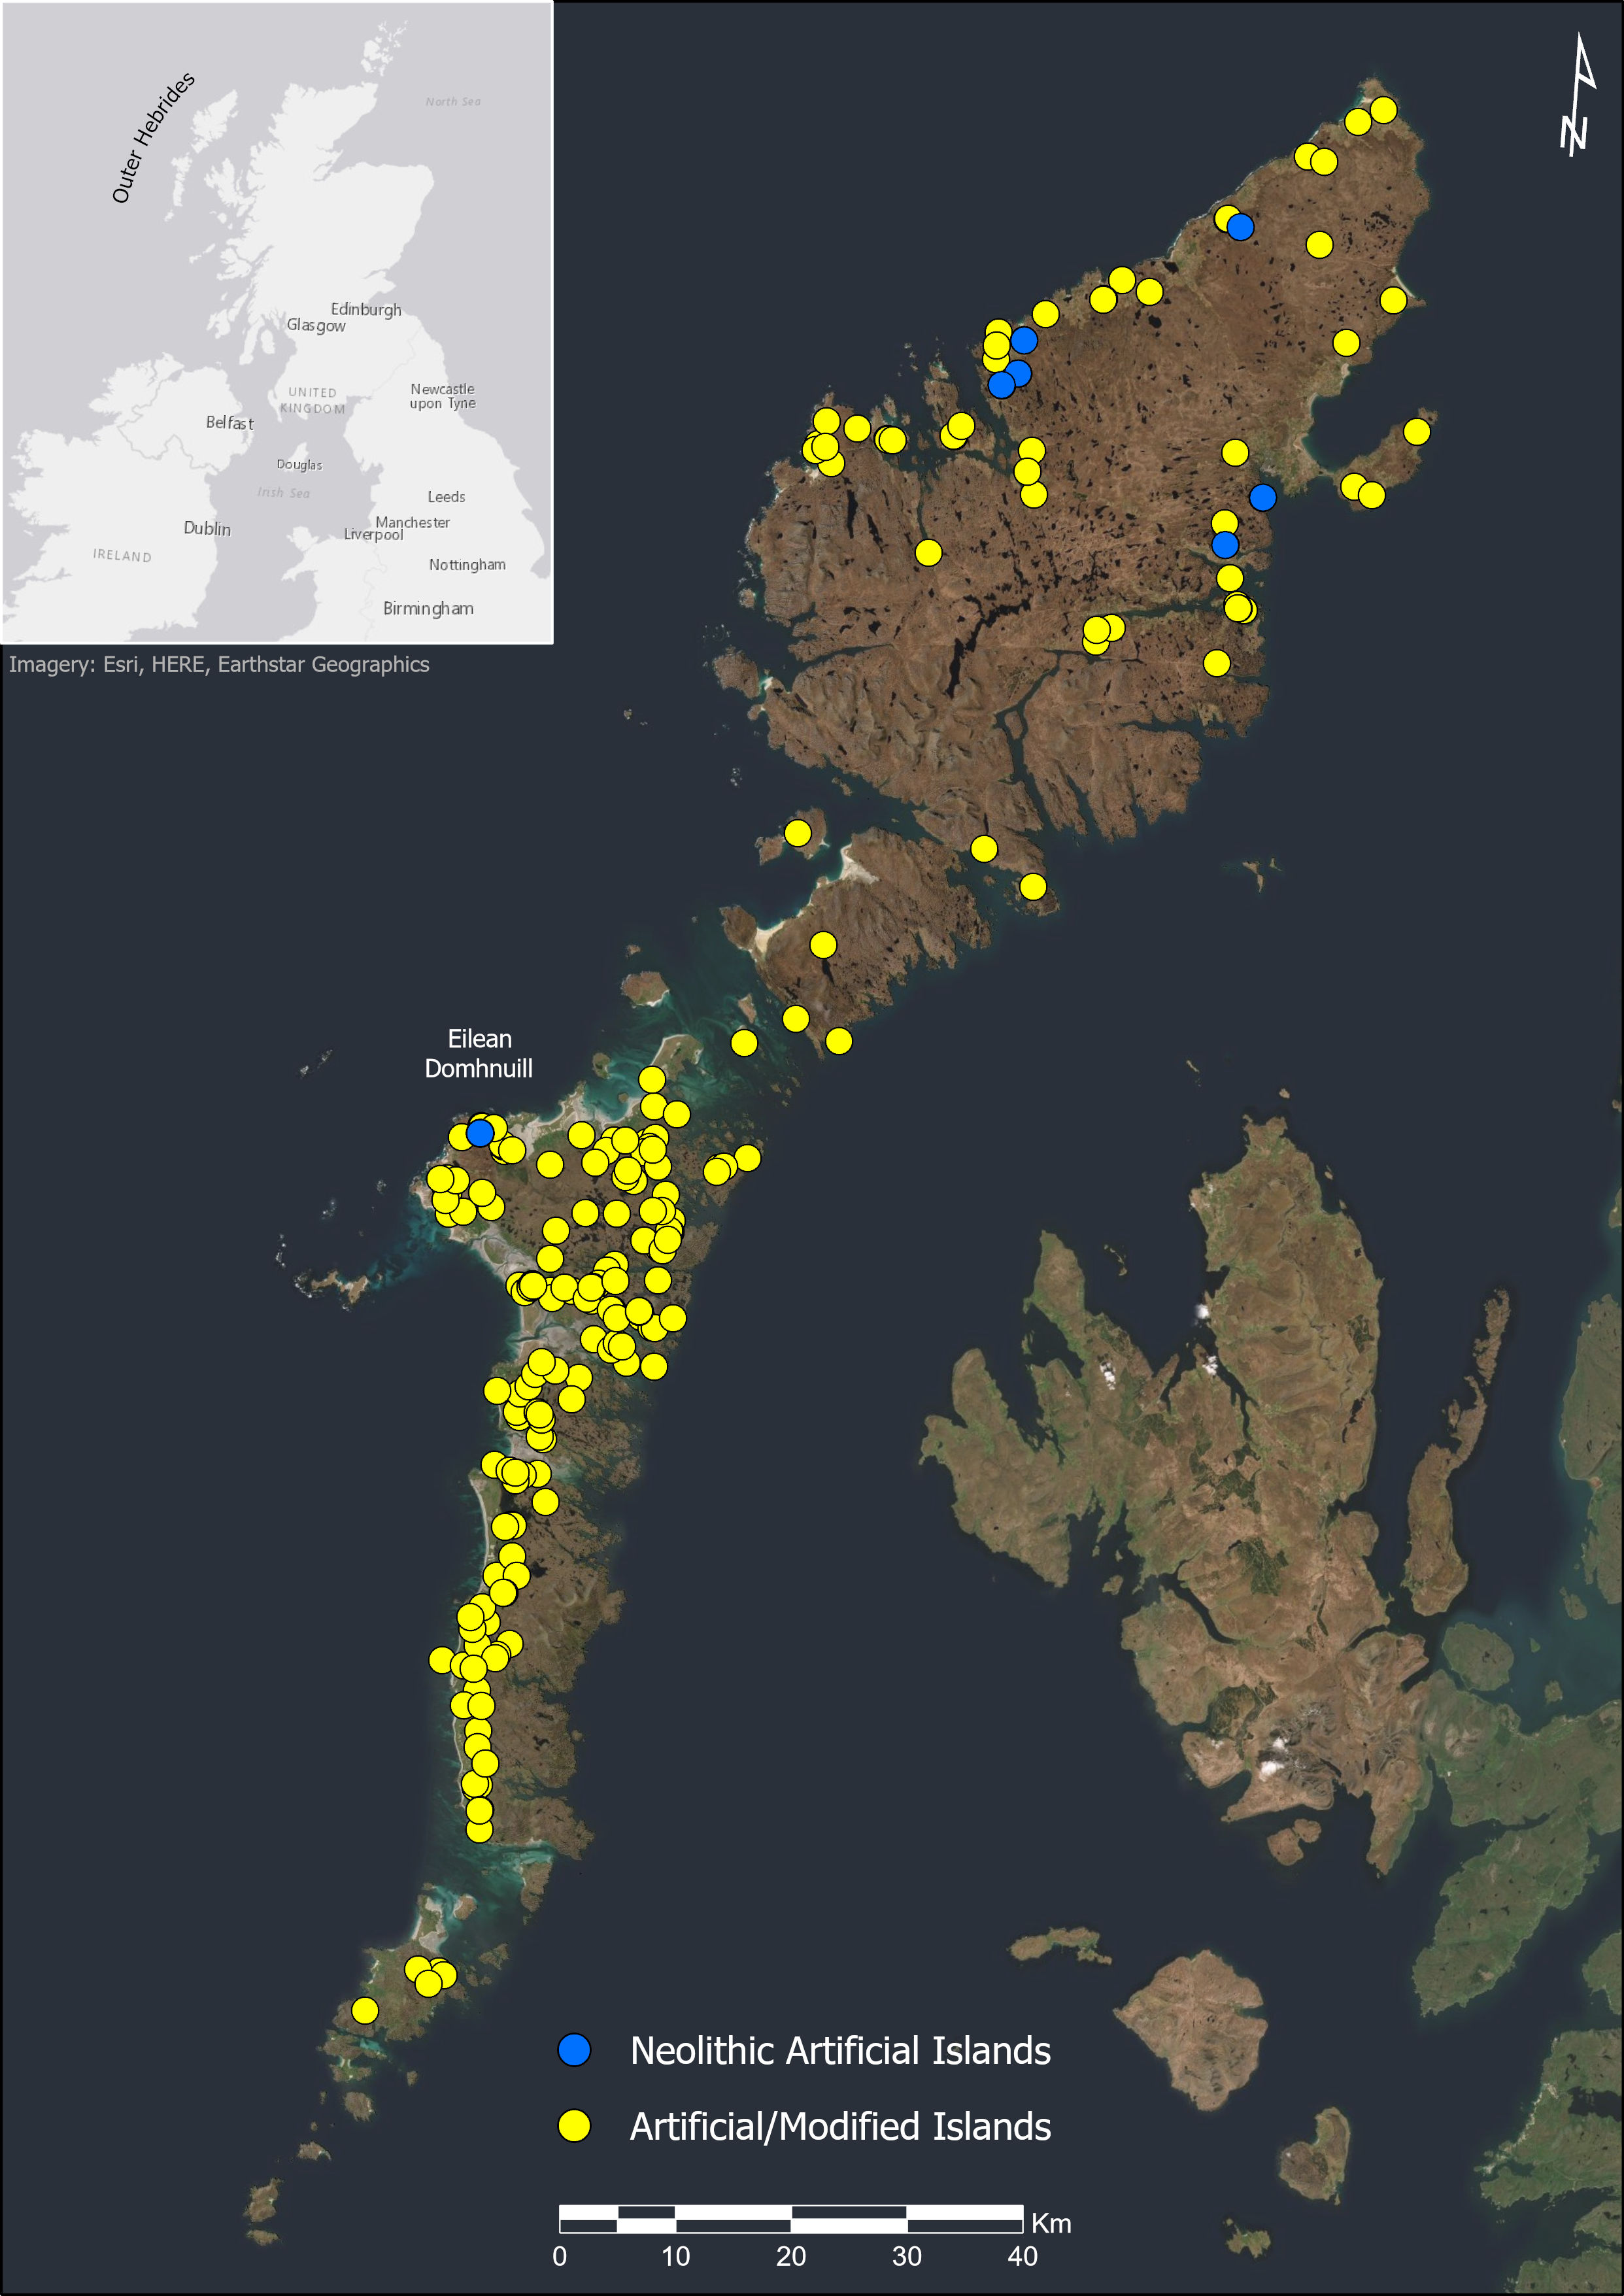 Map of all artificial islands in the Outer Hebrides along with those dated to the Neolithic.  The majority of the artificial/modified islands are to the south while most of the Neolithic artificial islands are in the north.